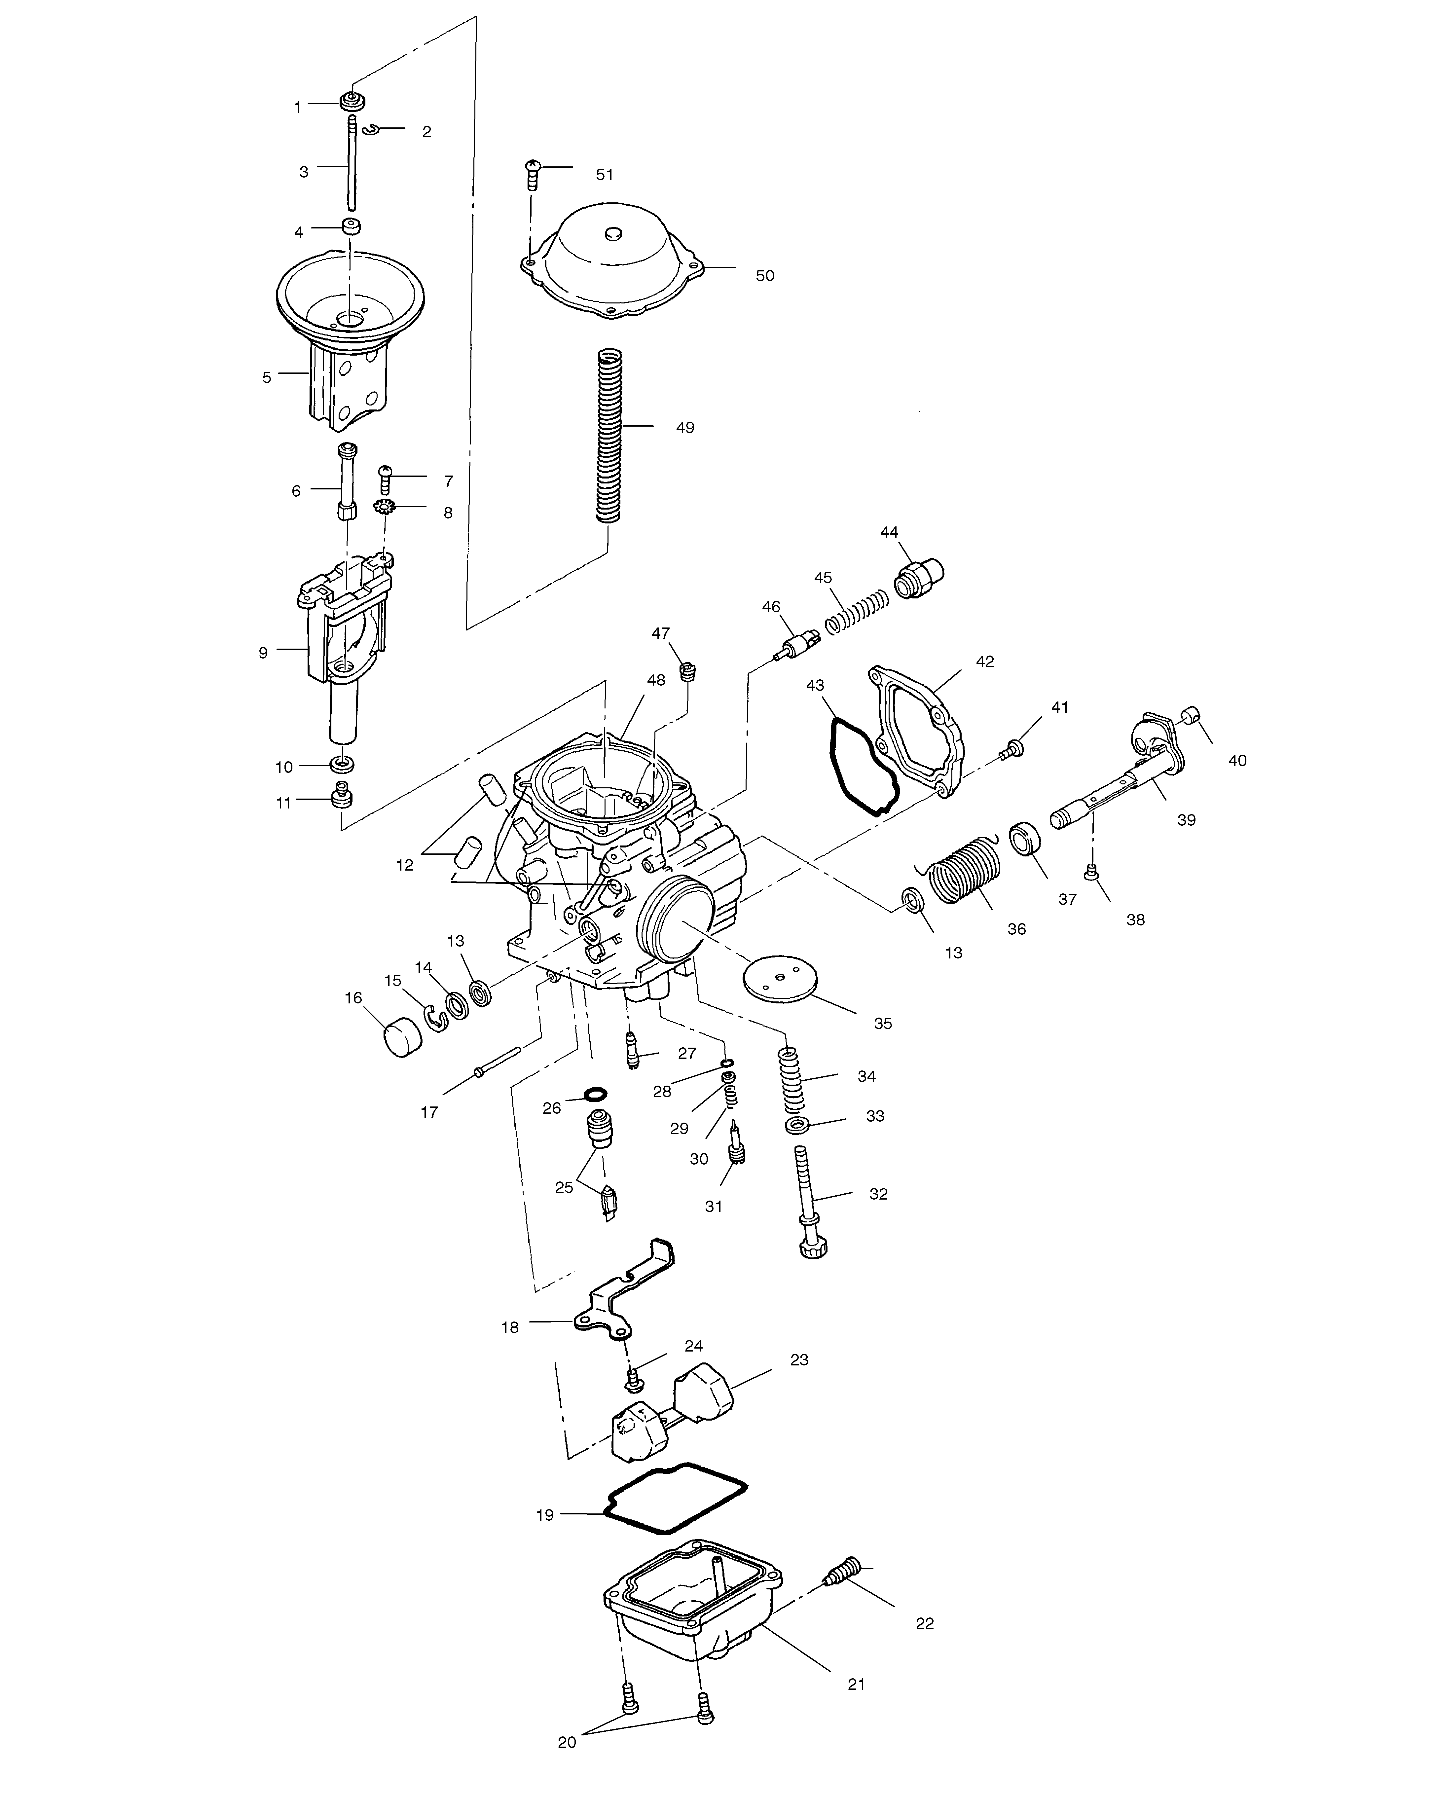 Part Number : 3131395 PLUNGER ASSEMBLY